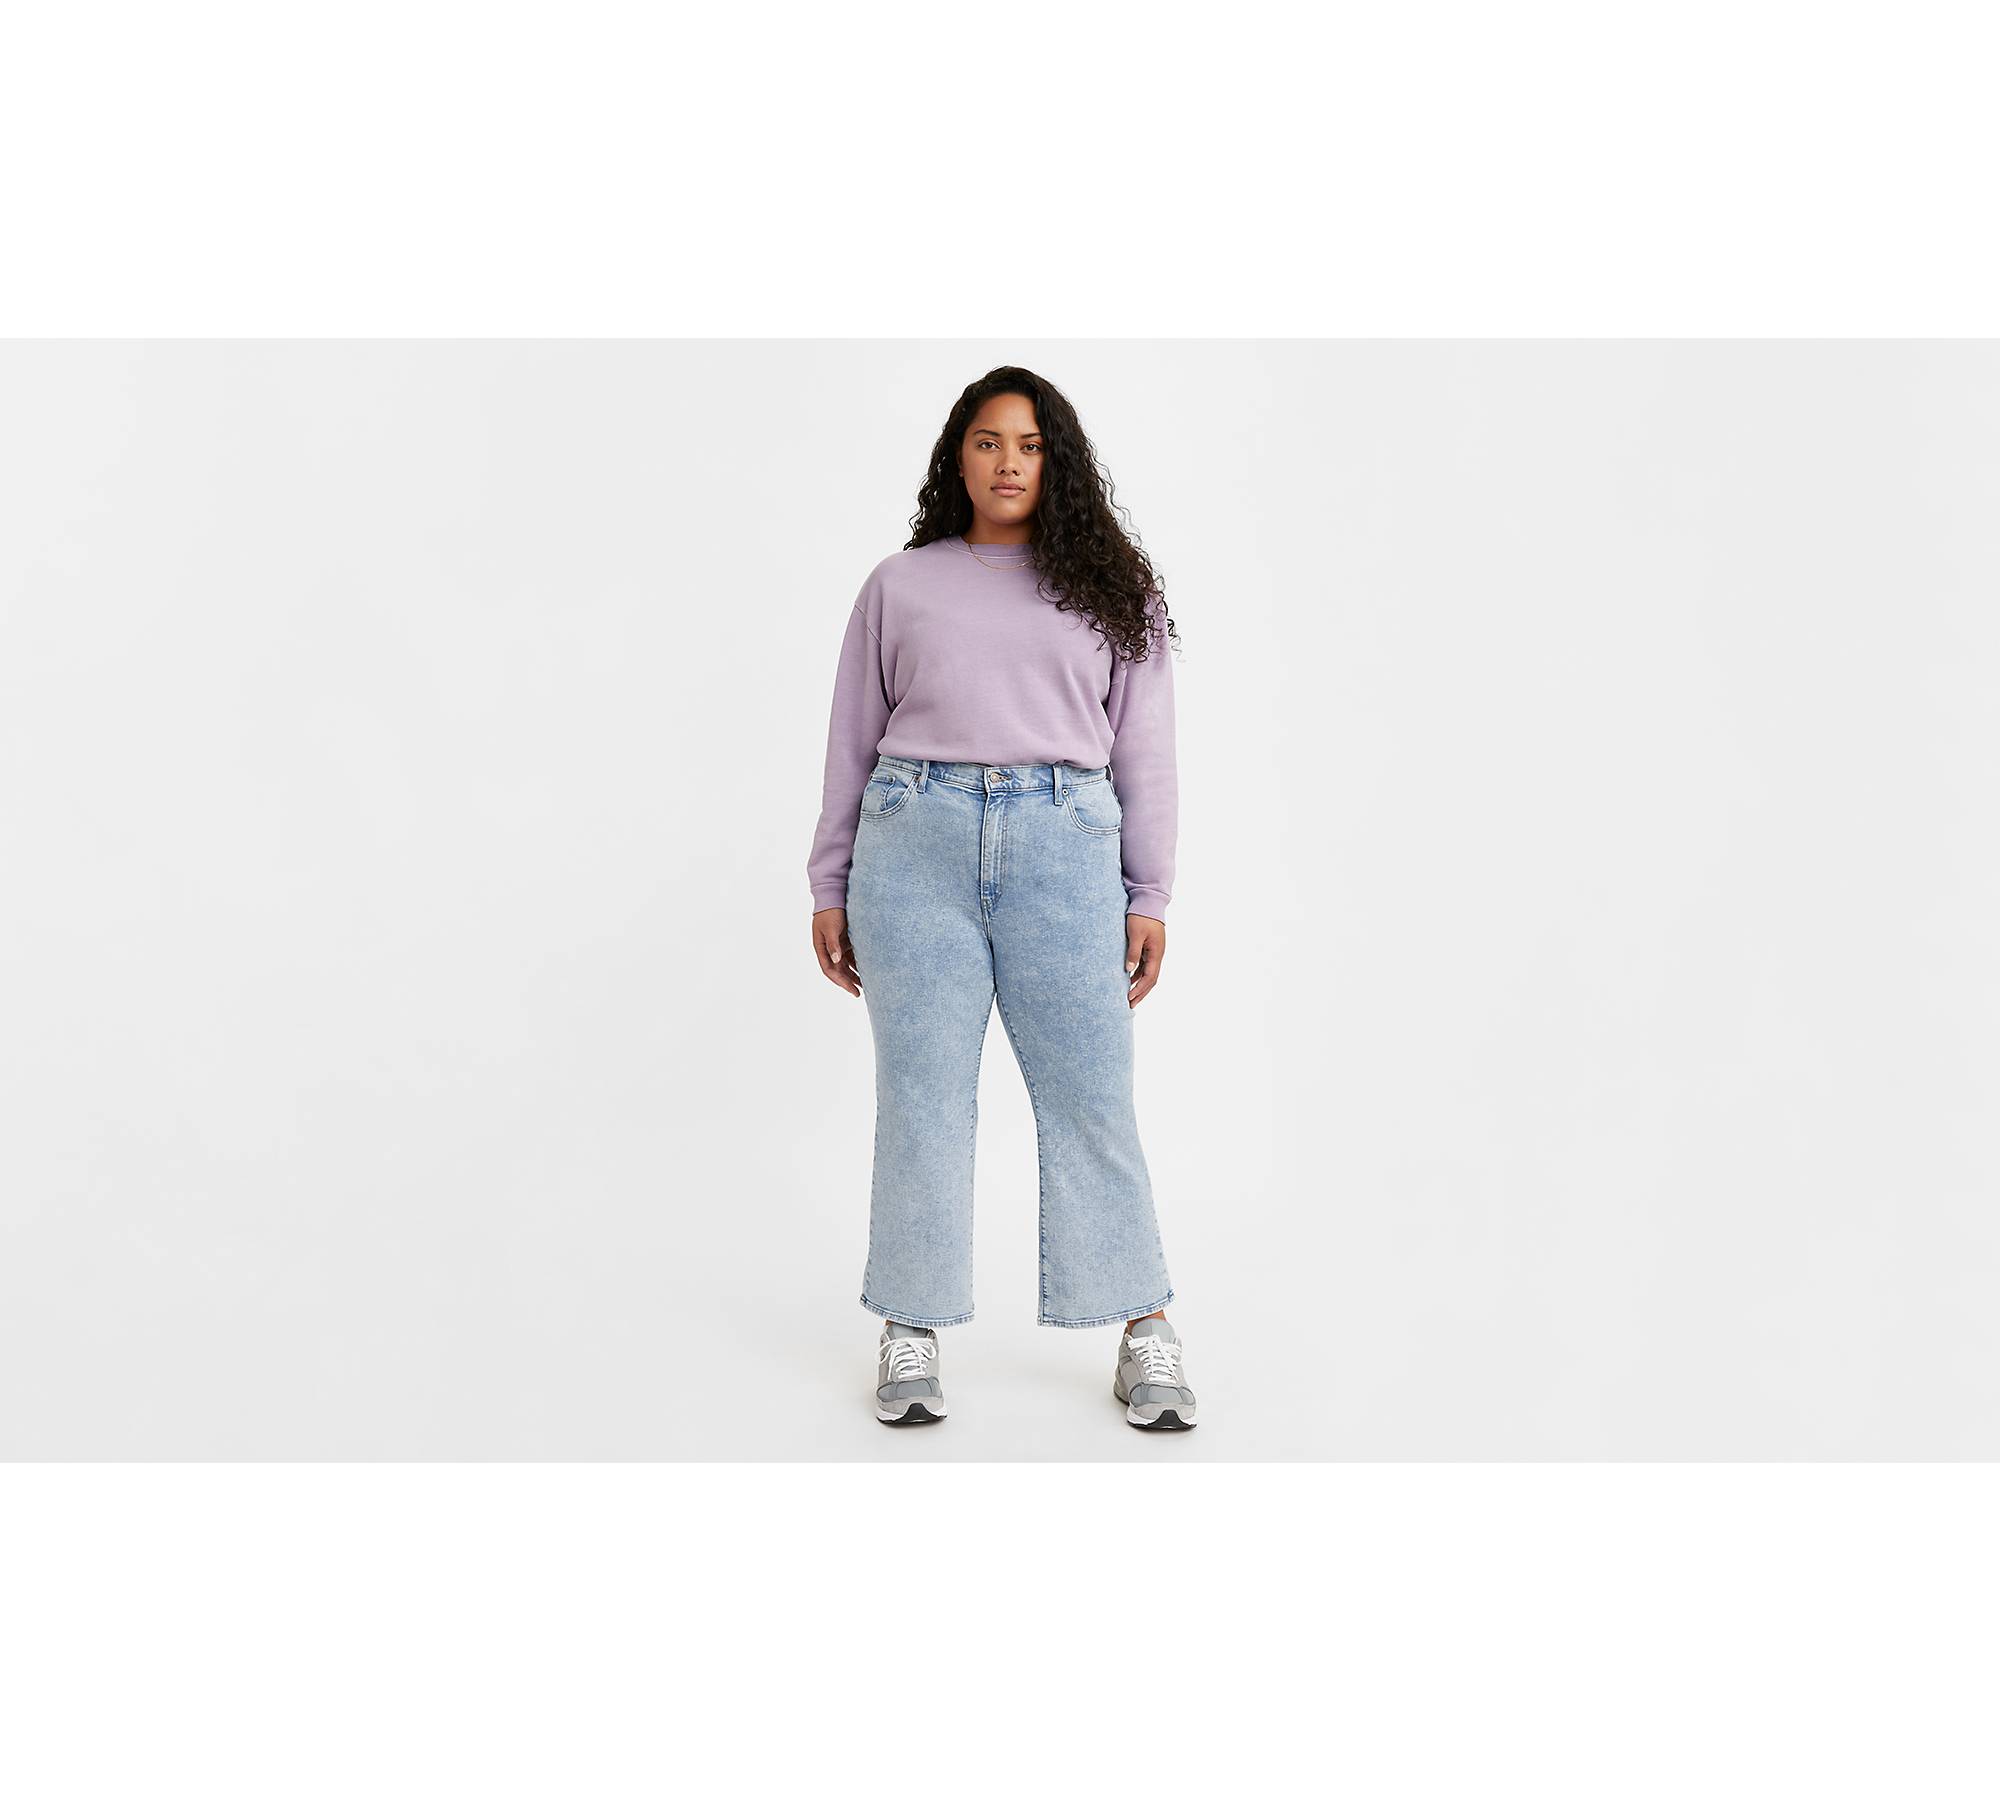 Light Wash Denim Jeans - High Rise Jeans - Cropped Flared Jeans